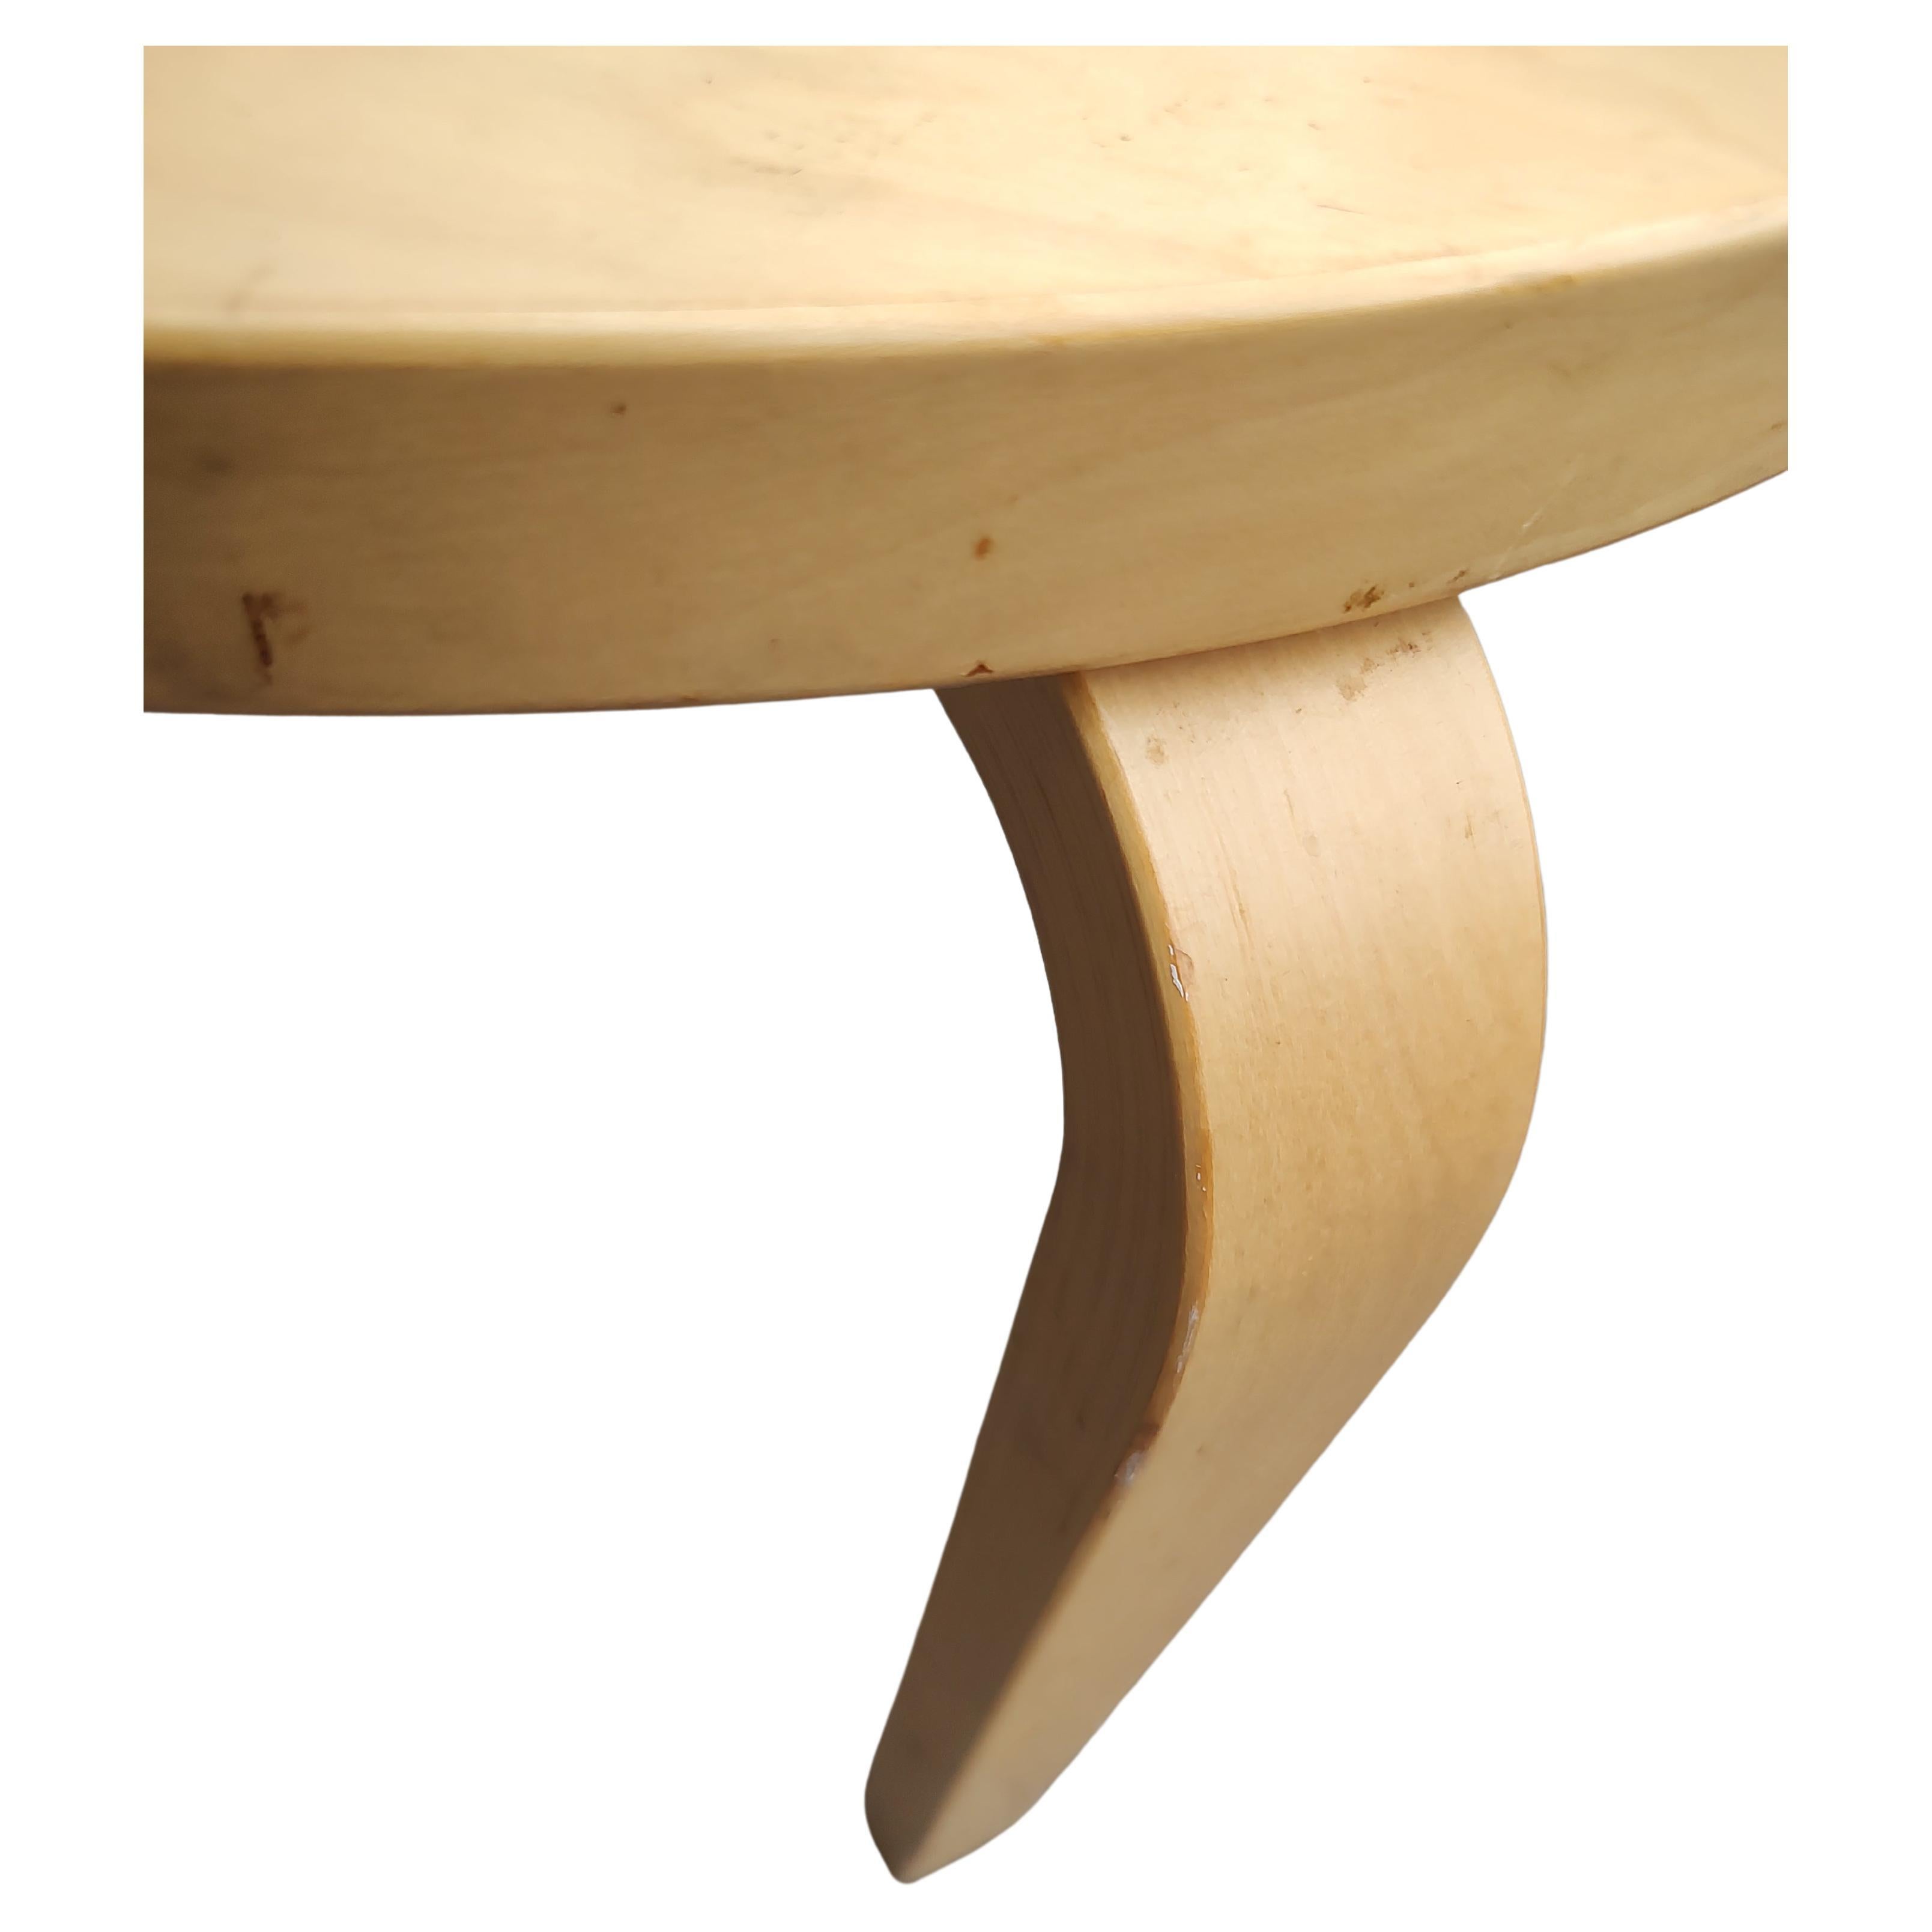 Simple yet elegant design by the iconic Alvar Aalto for artek. Round birch top about 19 in diameter with a height of 17.5 a good size to use in several locations. In very good condition with minimal wear.